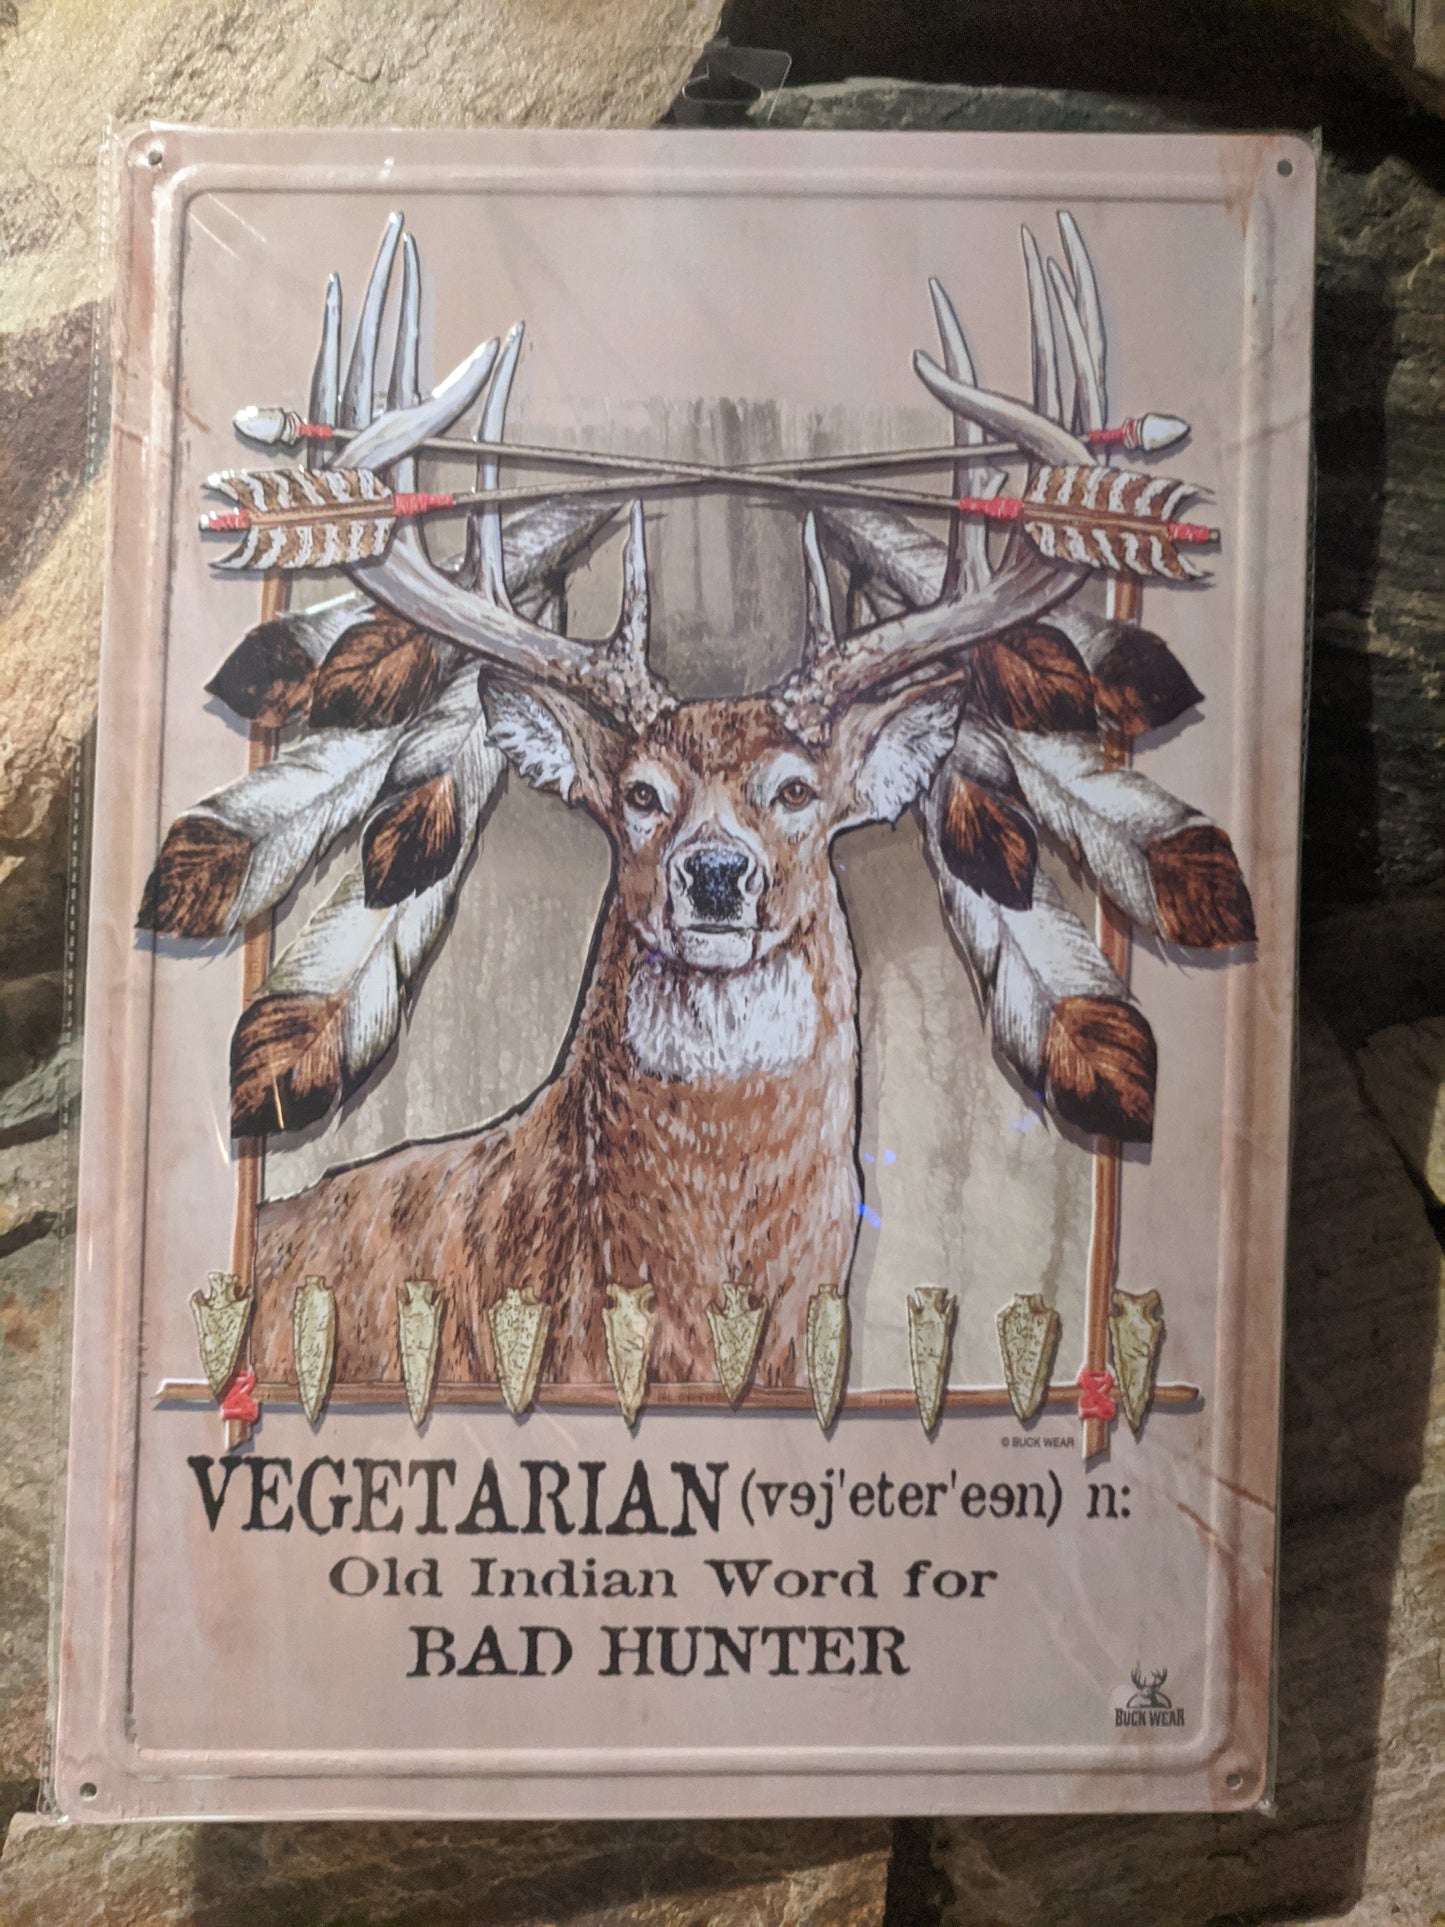 Vegetarian - Old Indian Word for Bad Hunter 12"x17" Tin Sign